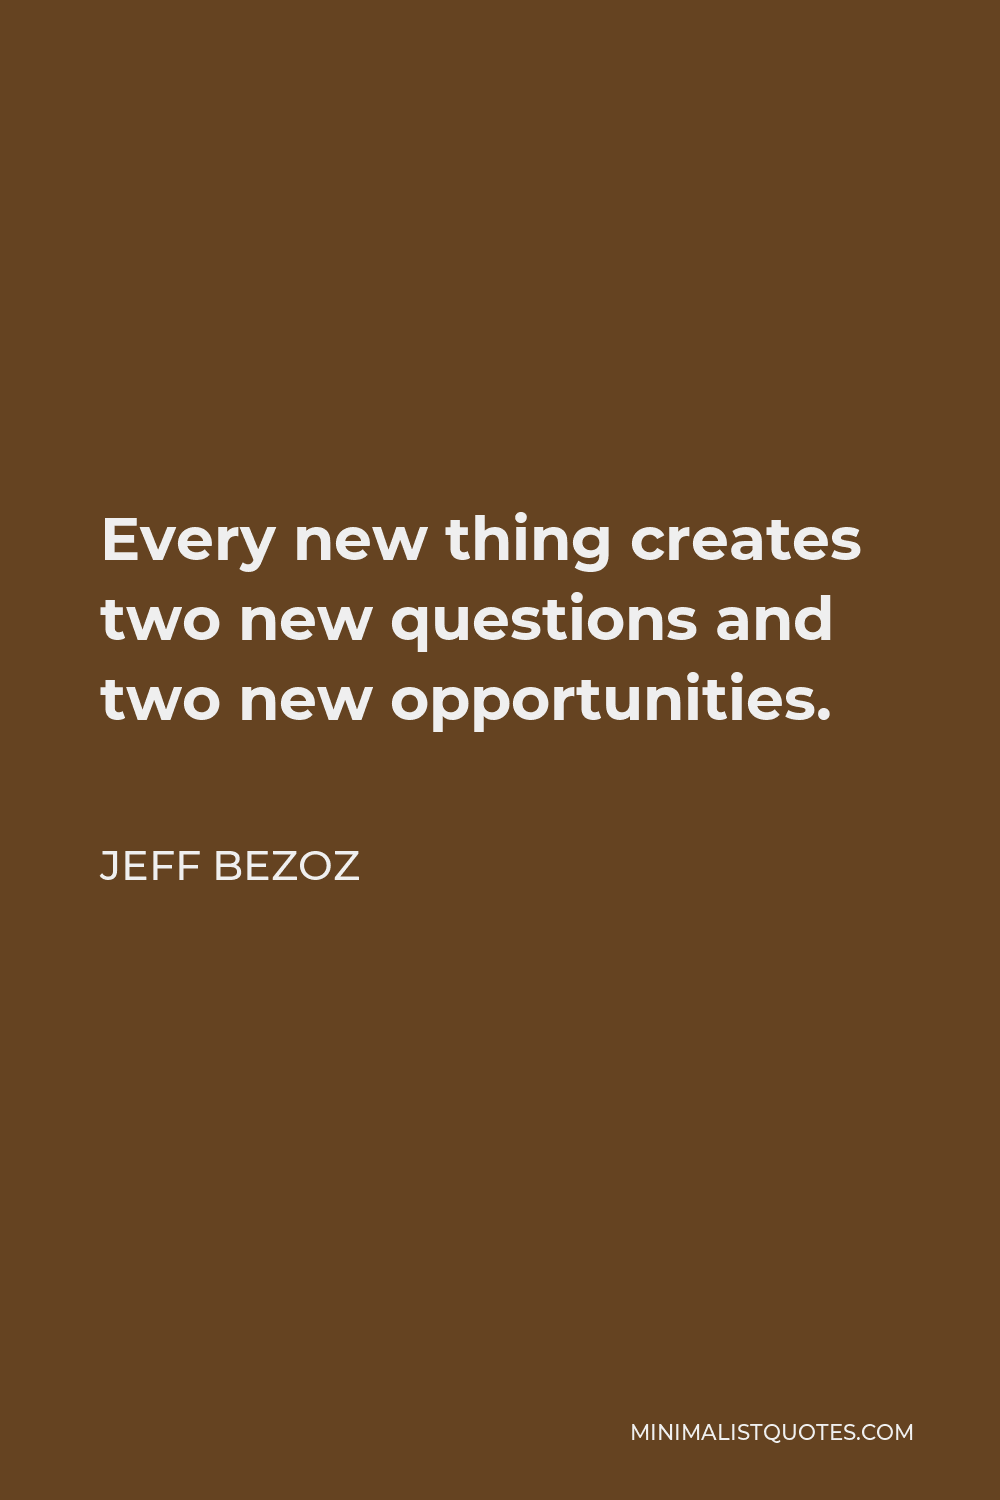 Jeff Bezoz Quote - Every new thing creates two new questions and two new opportunities.